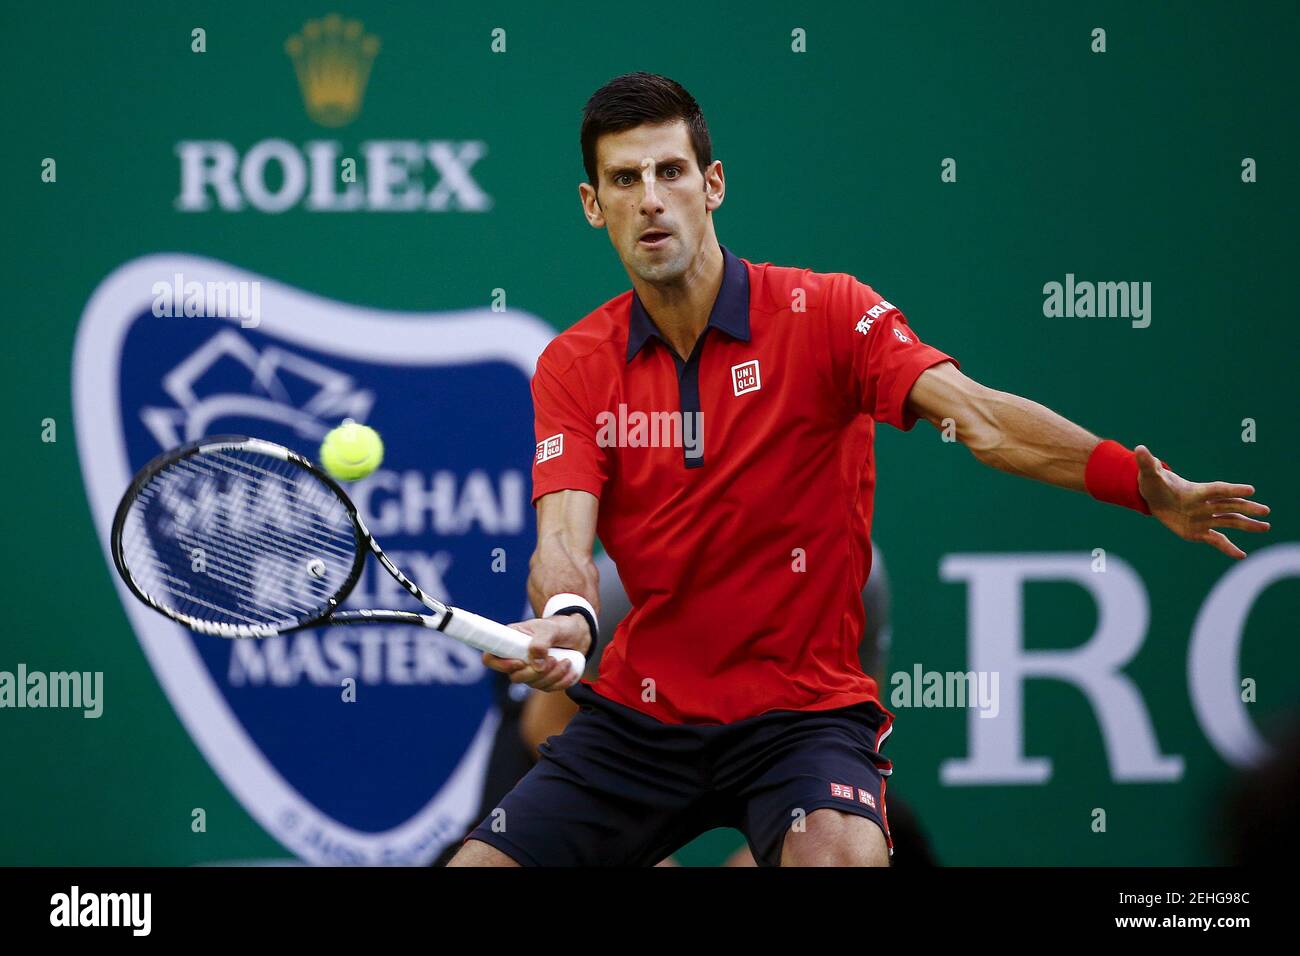 Novak Djokovic of Serbia returns the ball to Jo-Wilfried Tsonga of France during their men's singles final match at the Shanghai Masters tennis tournament in Shanghai, China, October 18, 2015.  REUTERS/Damir Sagolj   Picture Supplied by Action Images Stock Photo